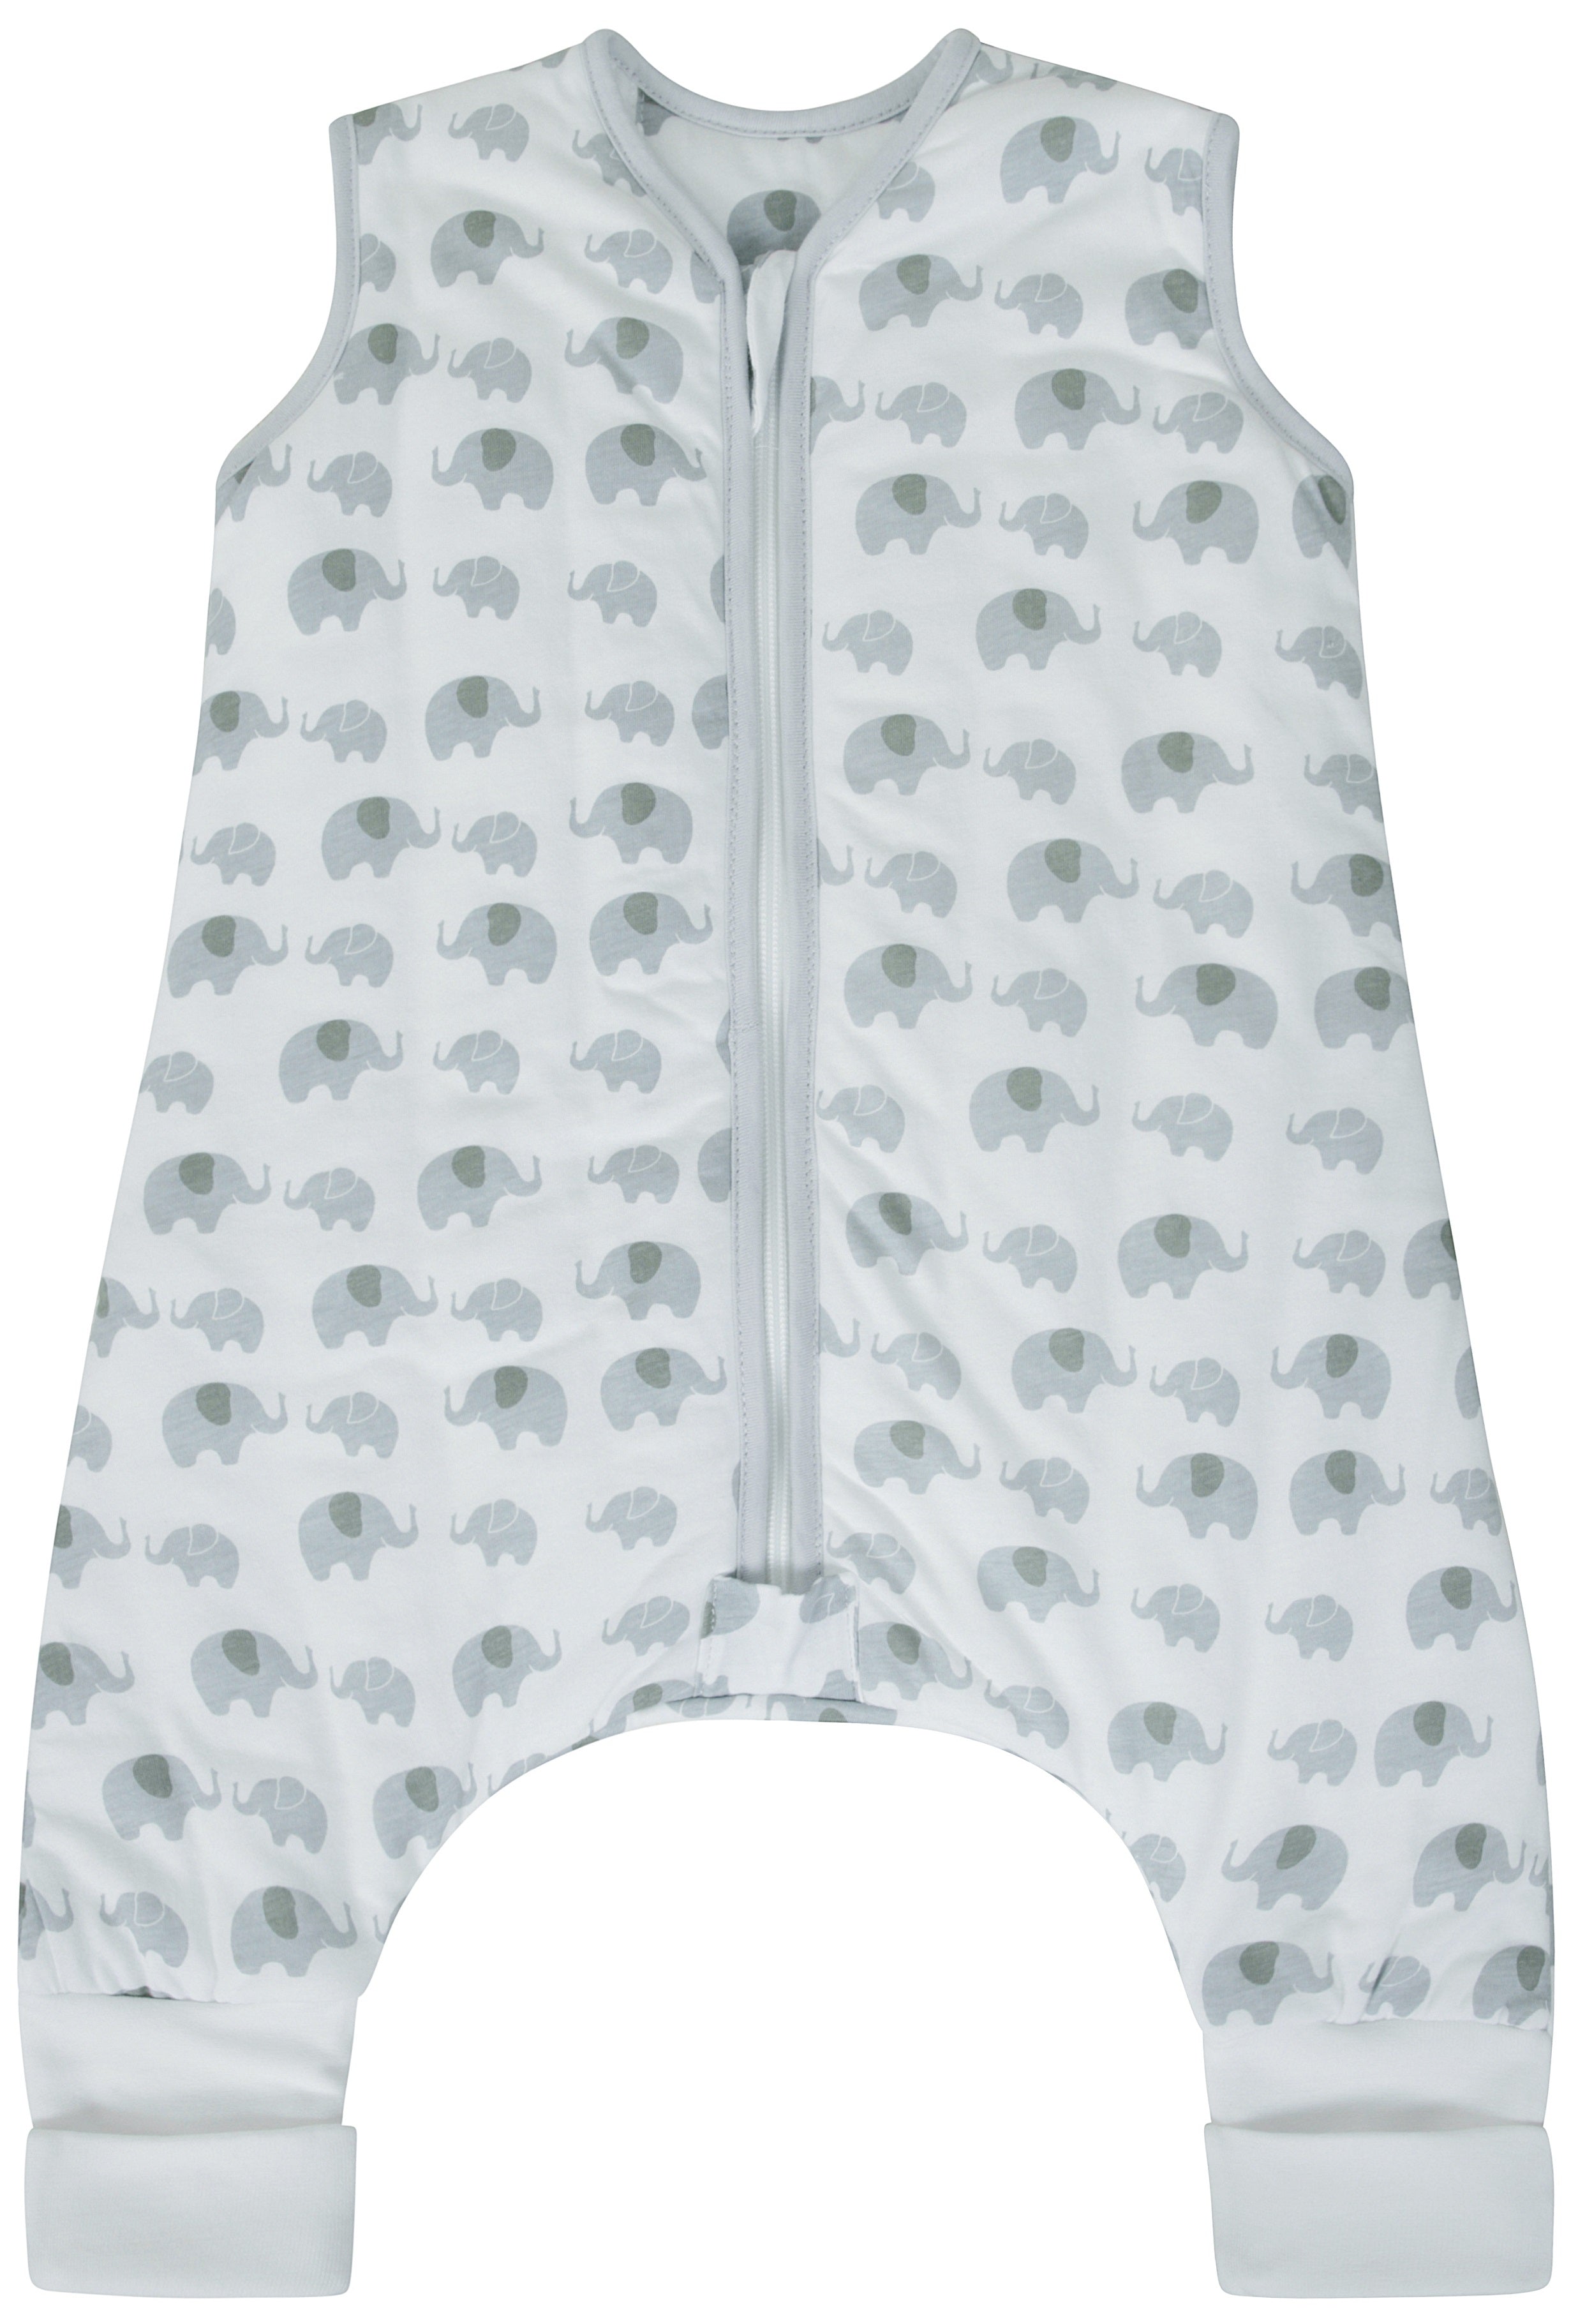 Snoozebag With Feet - Baby Sleeping Bag With Non Slip Feet 18-24 Months 2.5 Tog - Elephant Love